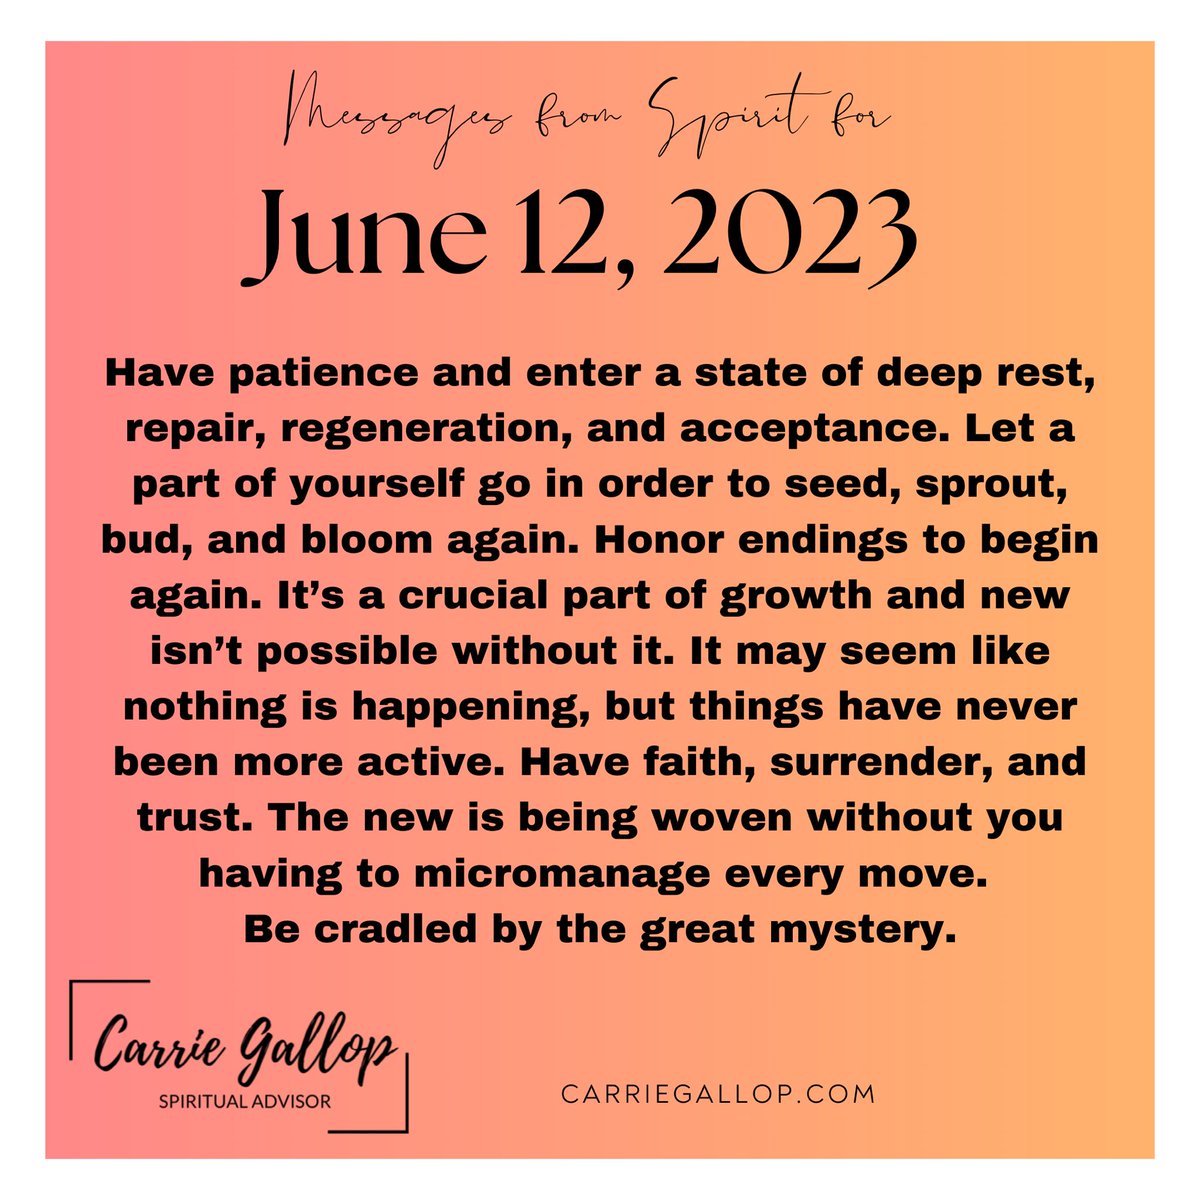 Messages From Spirit for June 12, 2023 ✨

#Daily #Guidance #Message #MessagesFromSpirit #June12 #HavePatience #Enter #Deep #Rest #Repair #Regeneration #Acceptance #LetGo #Seed #Sprout #Bud #Bloom #Honor #Endings #BeginAgain #Growth #New #Possibilities #HaveFaith #Surrender